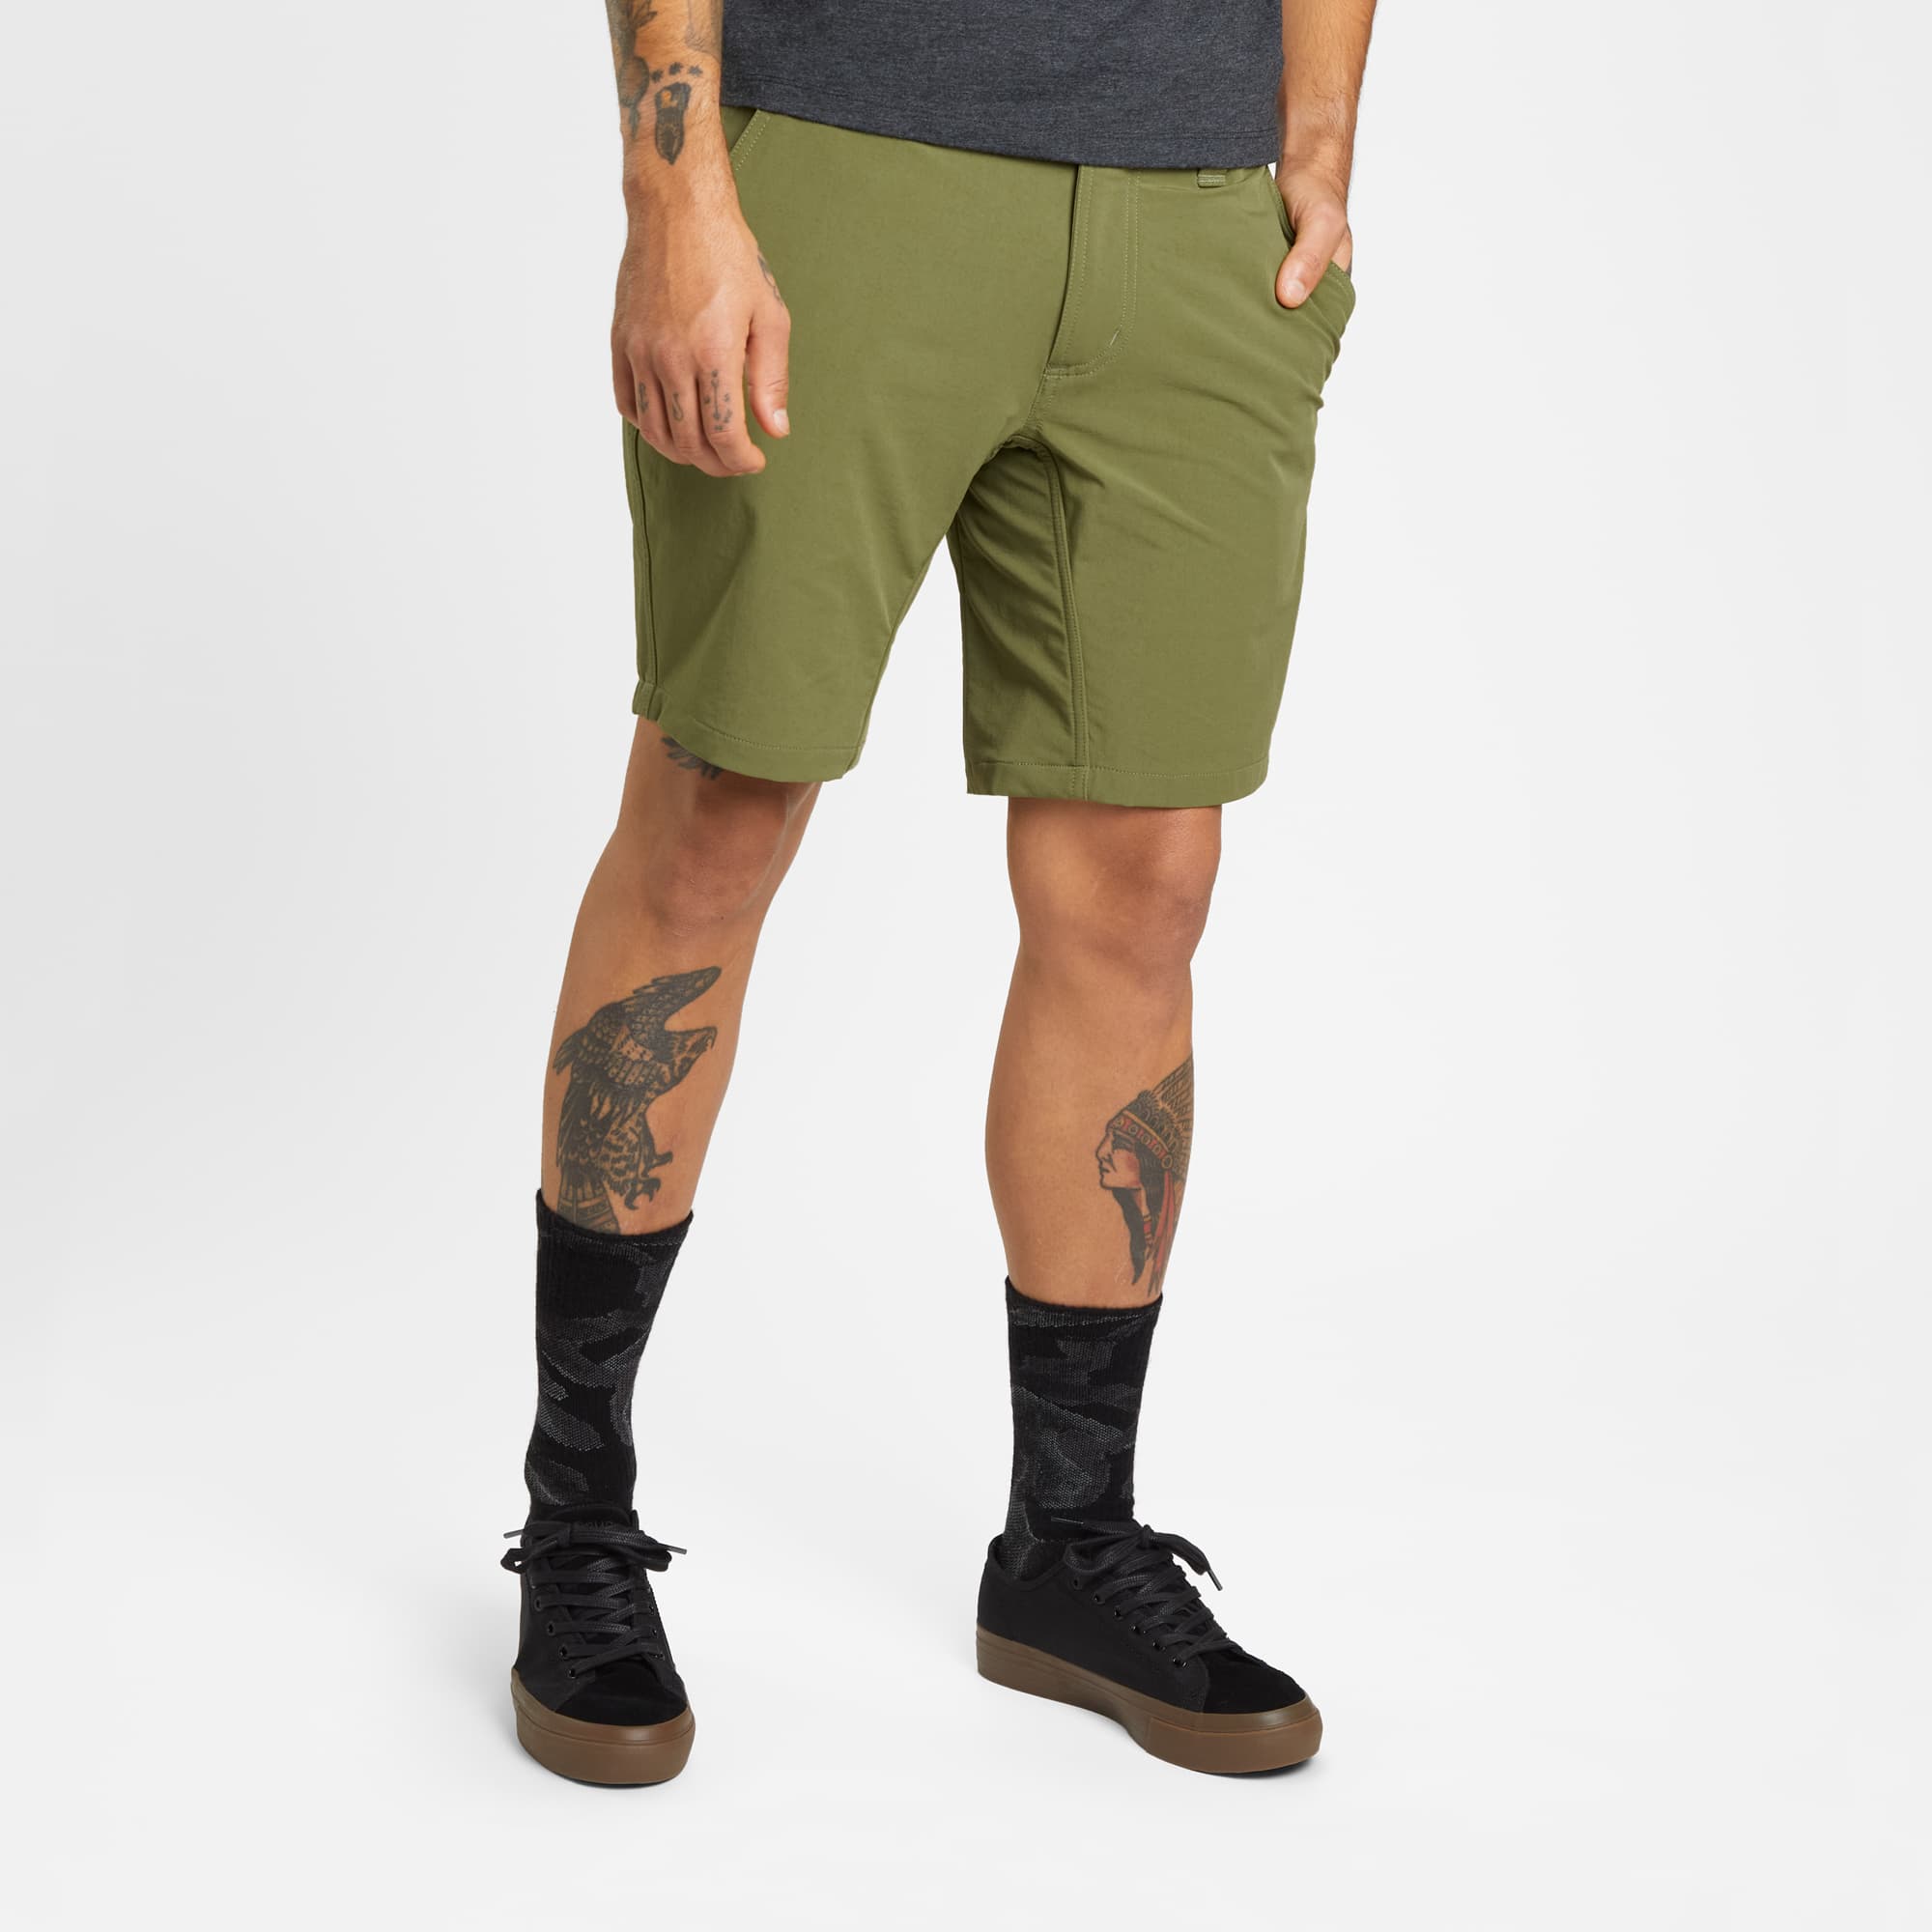 Men's tech Folsom Mid Short in green worn by a man #color_olive branch